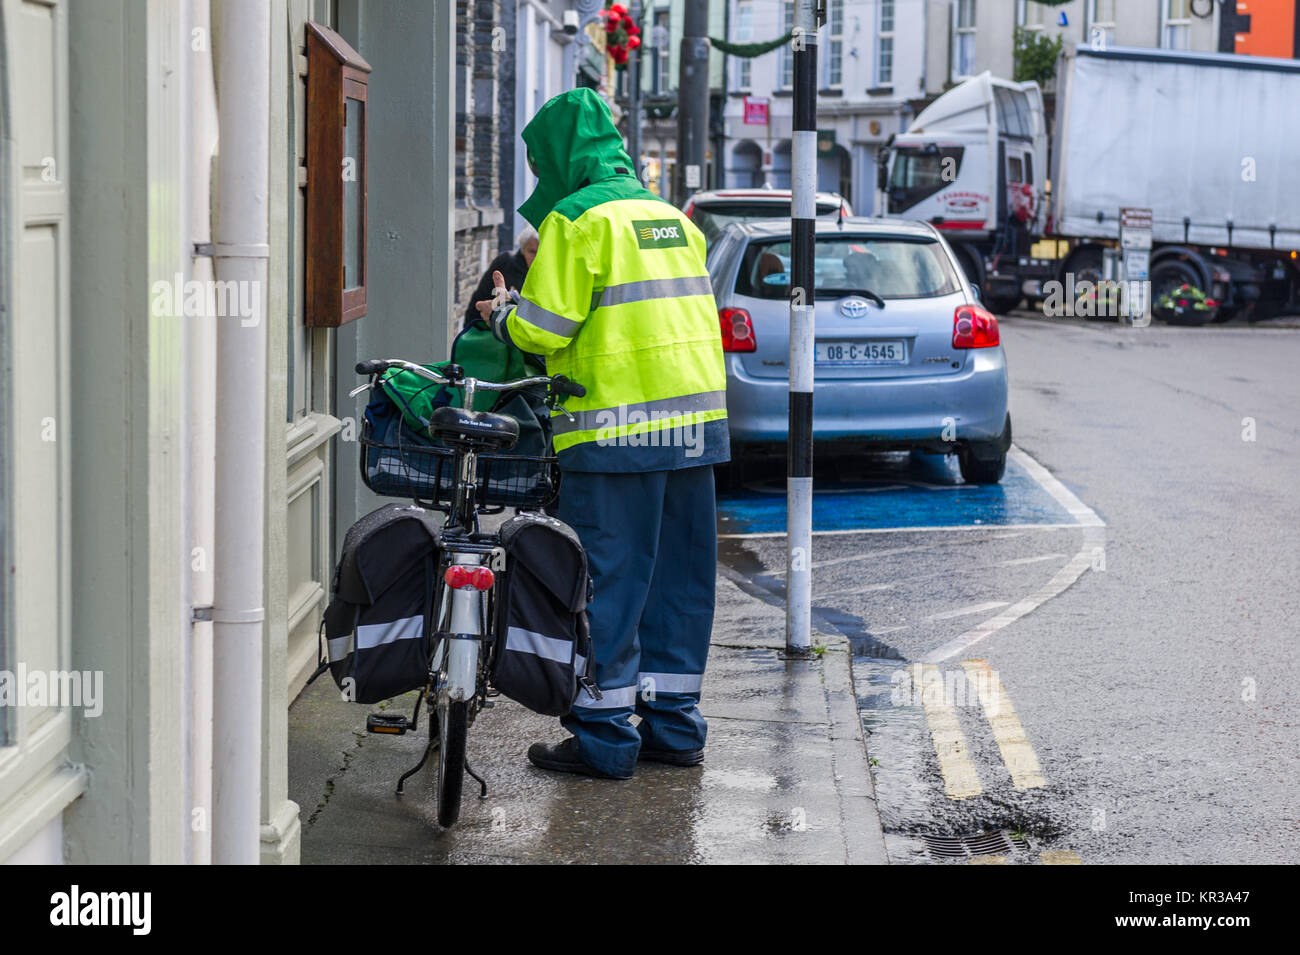 Postman working for An Post delivering letters on a push bike in Skibbereen, West Cork, Ireland. Stock Photo